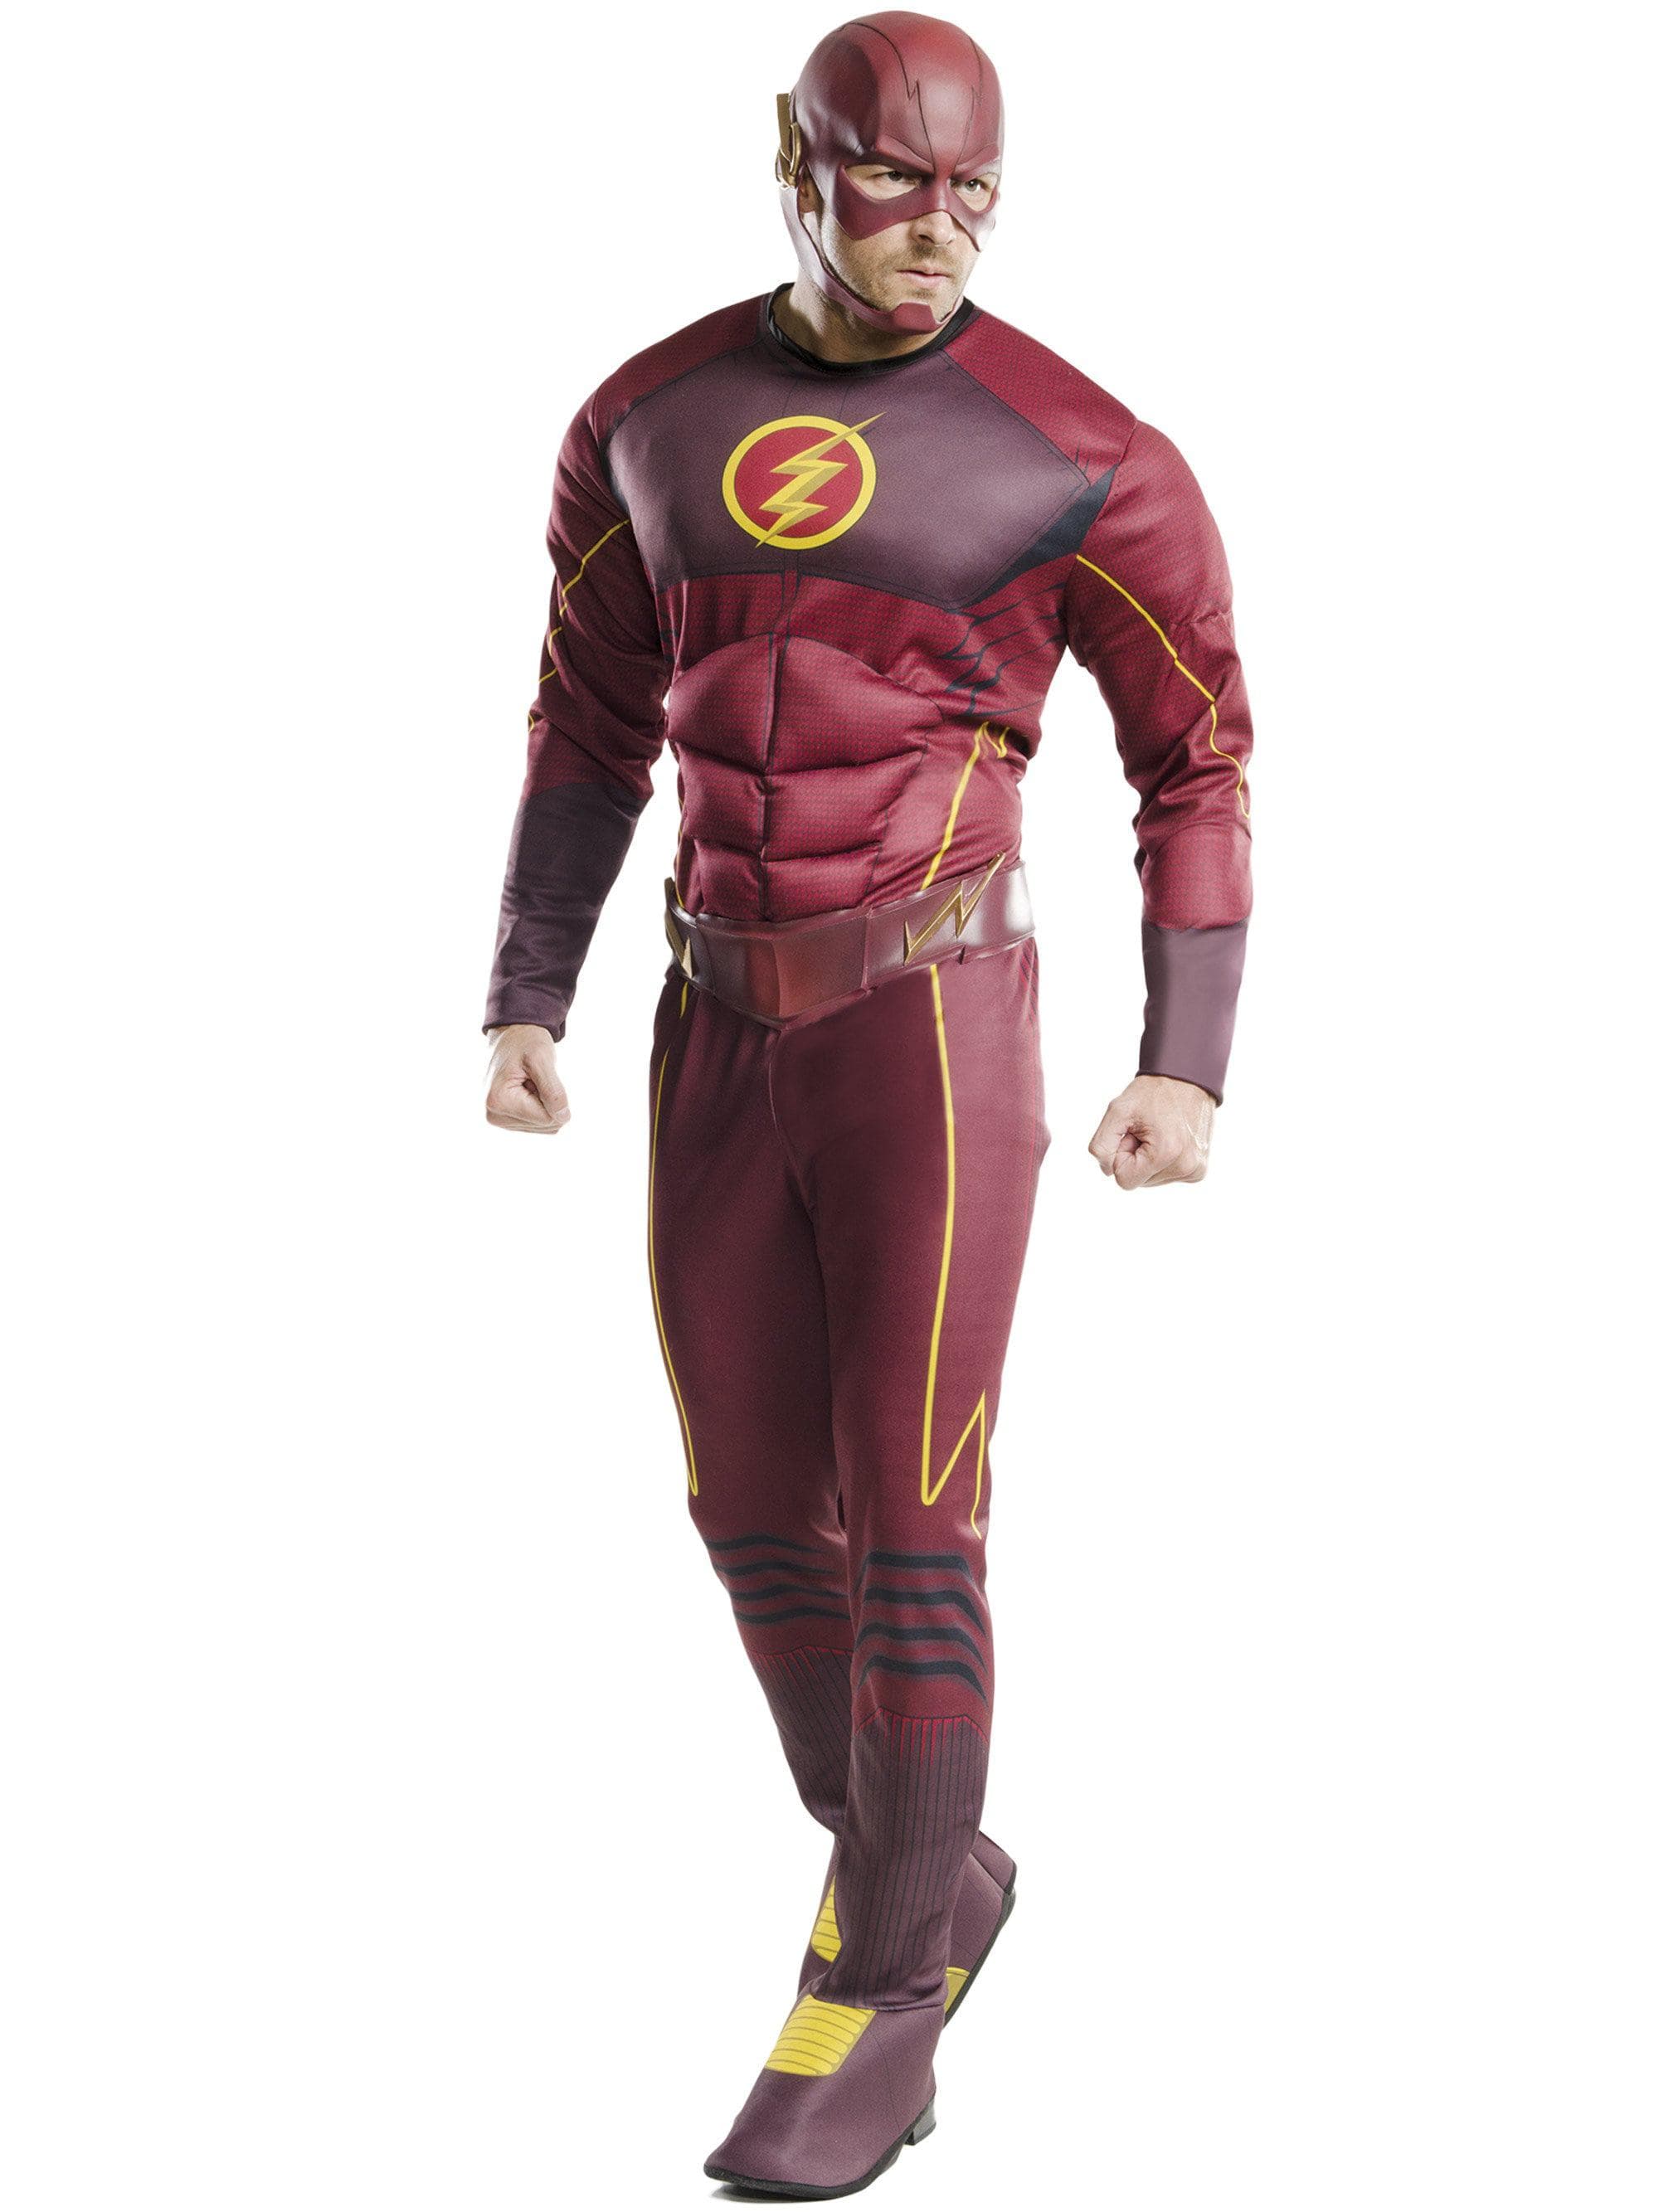 Adult Justice League Flash Deluxe Costume - costumes.com